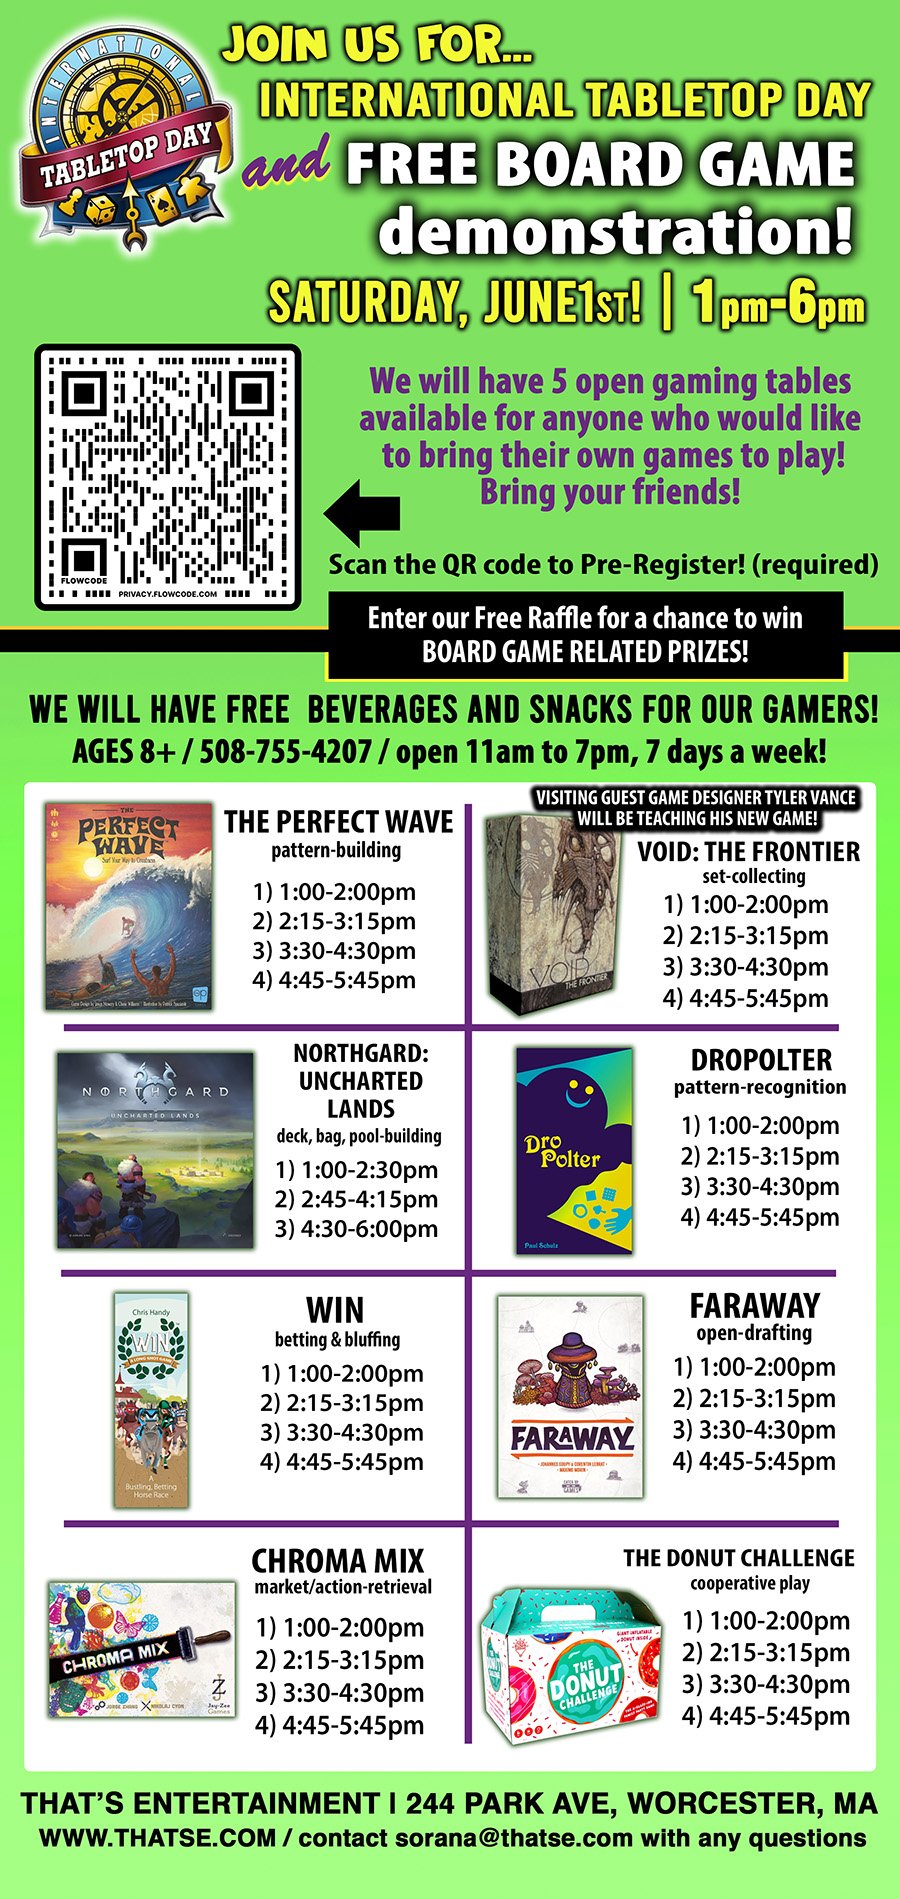 International Tabletop Day and Free Board Game Demo on Saturday, June 1st!